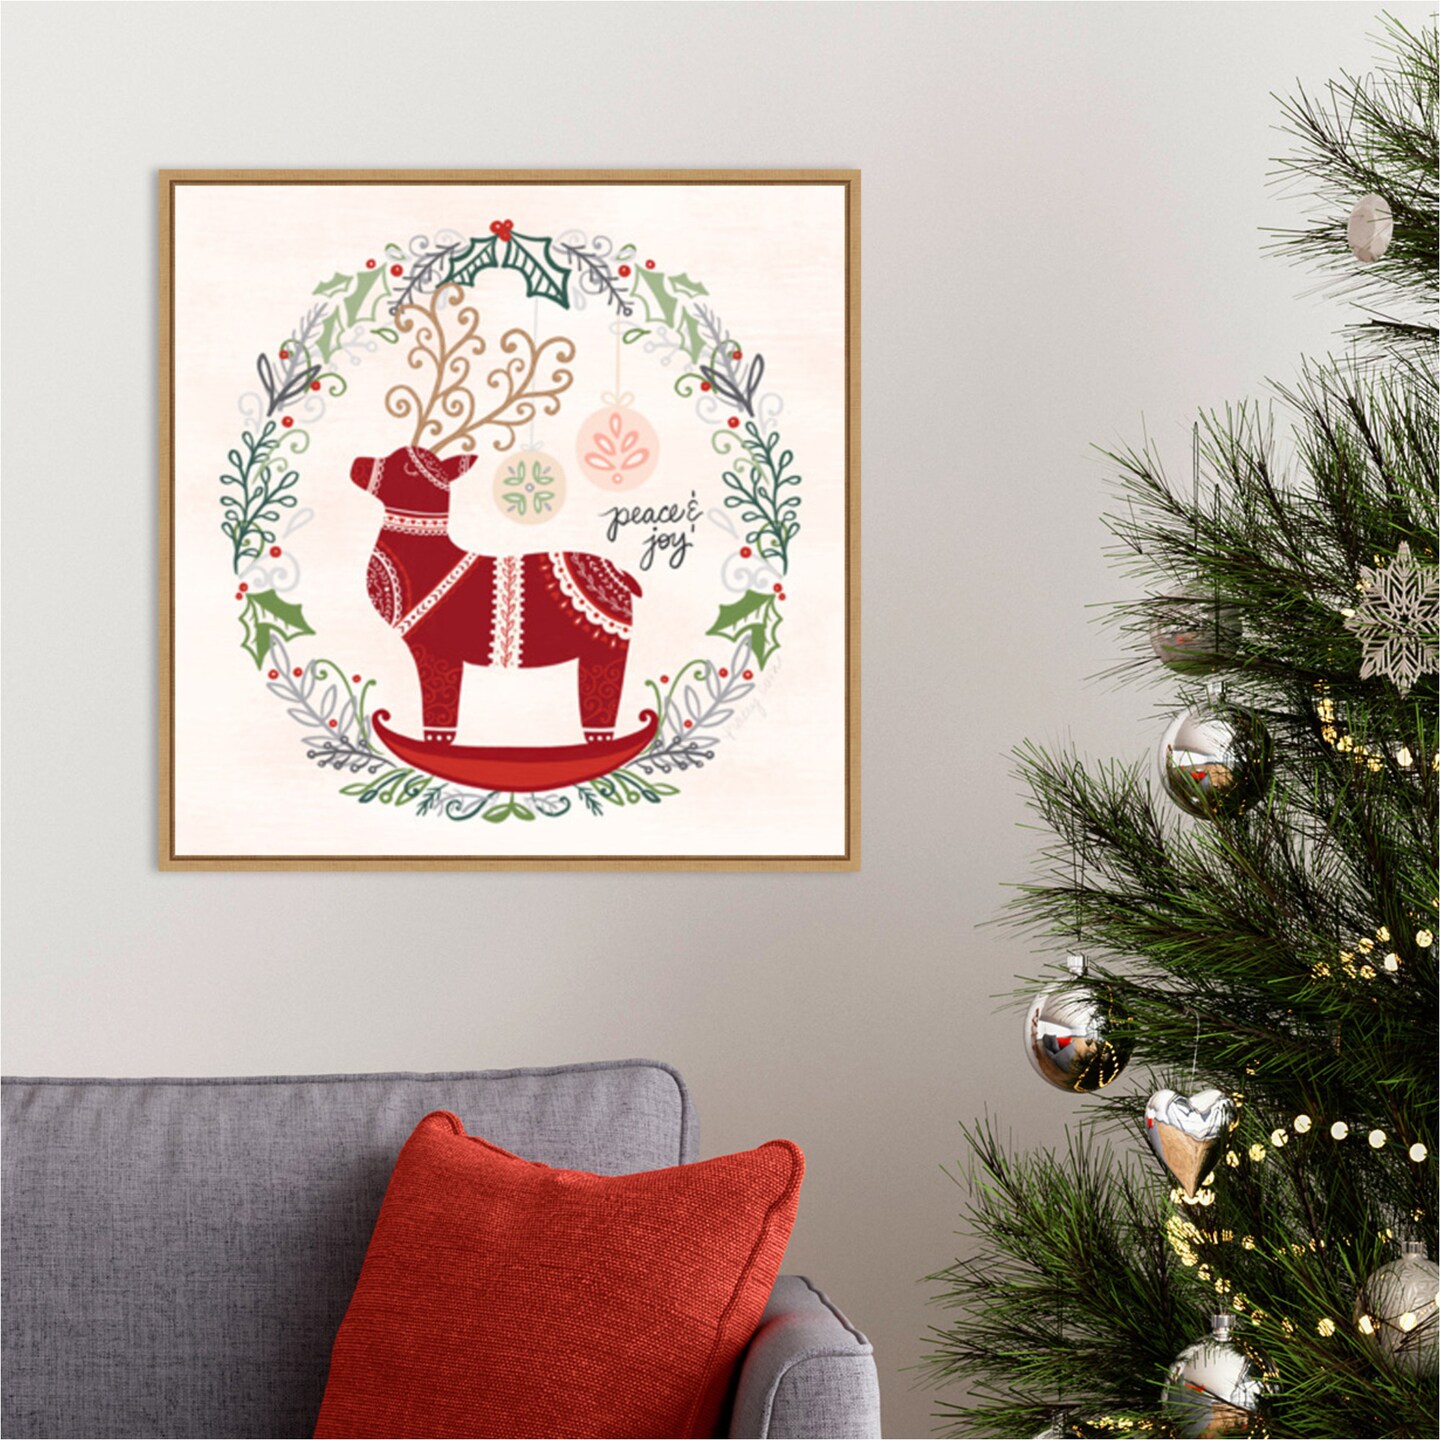 Hygge Christmas II by Noonday Design 22-in. W x 22-in. H. Canvas Wall Art Print Framed in Natural